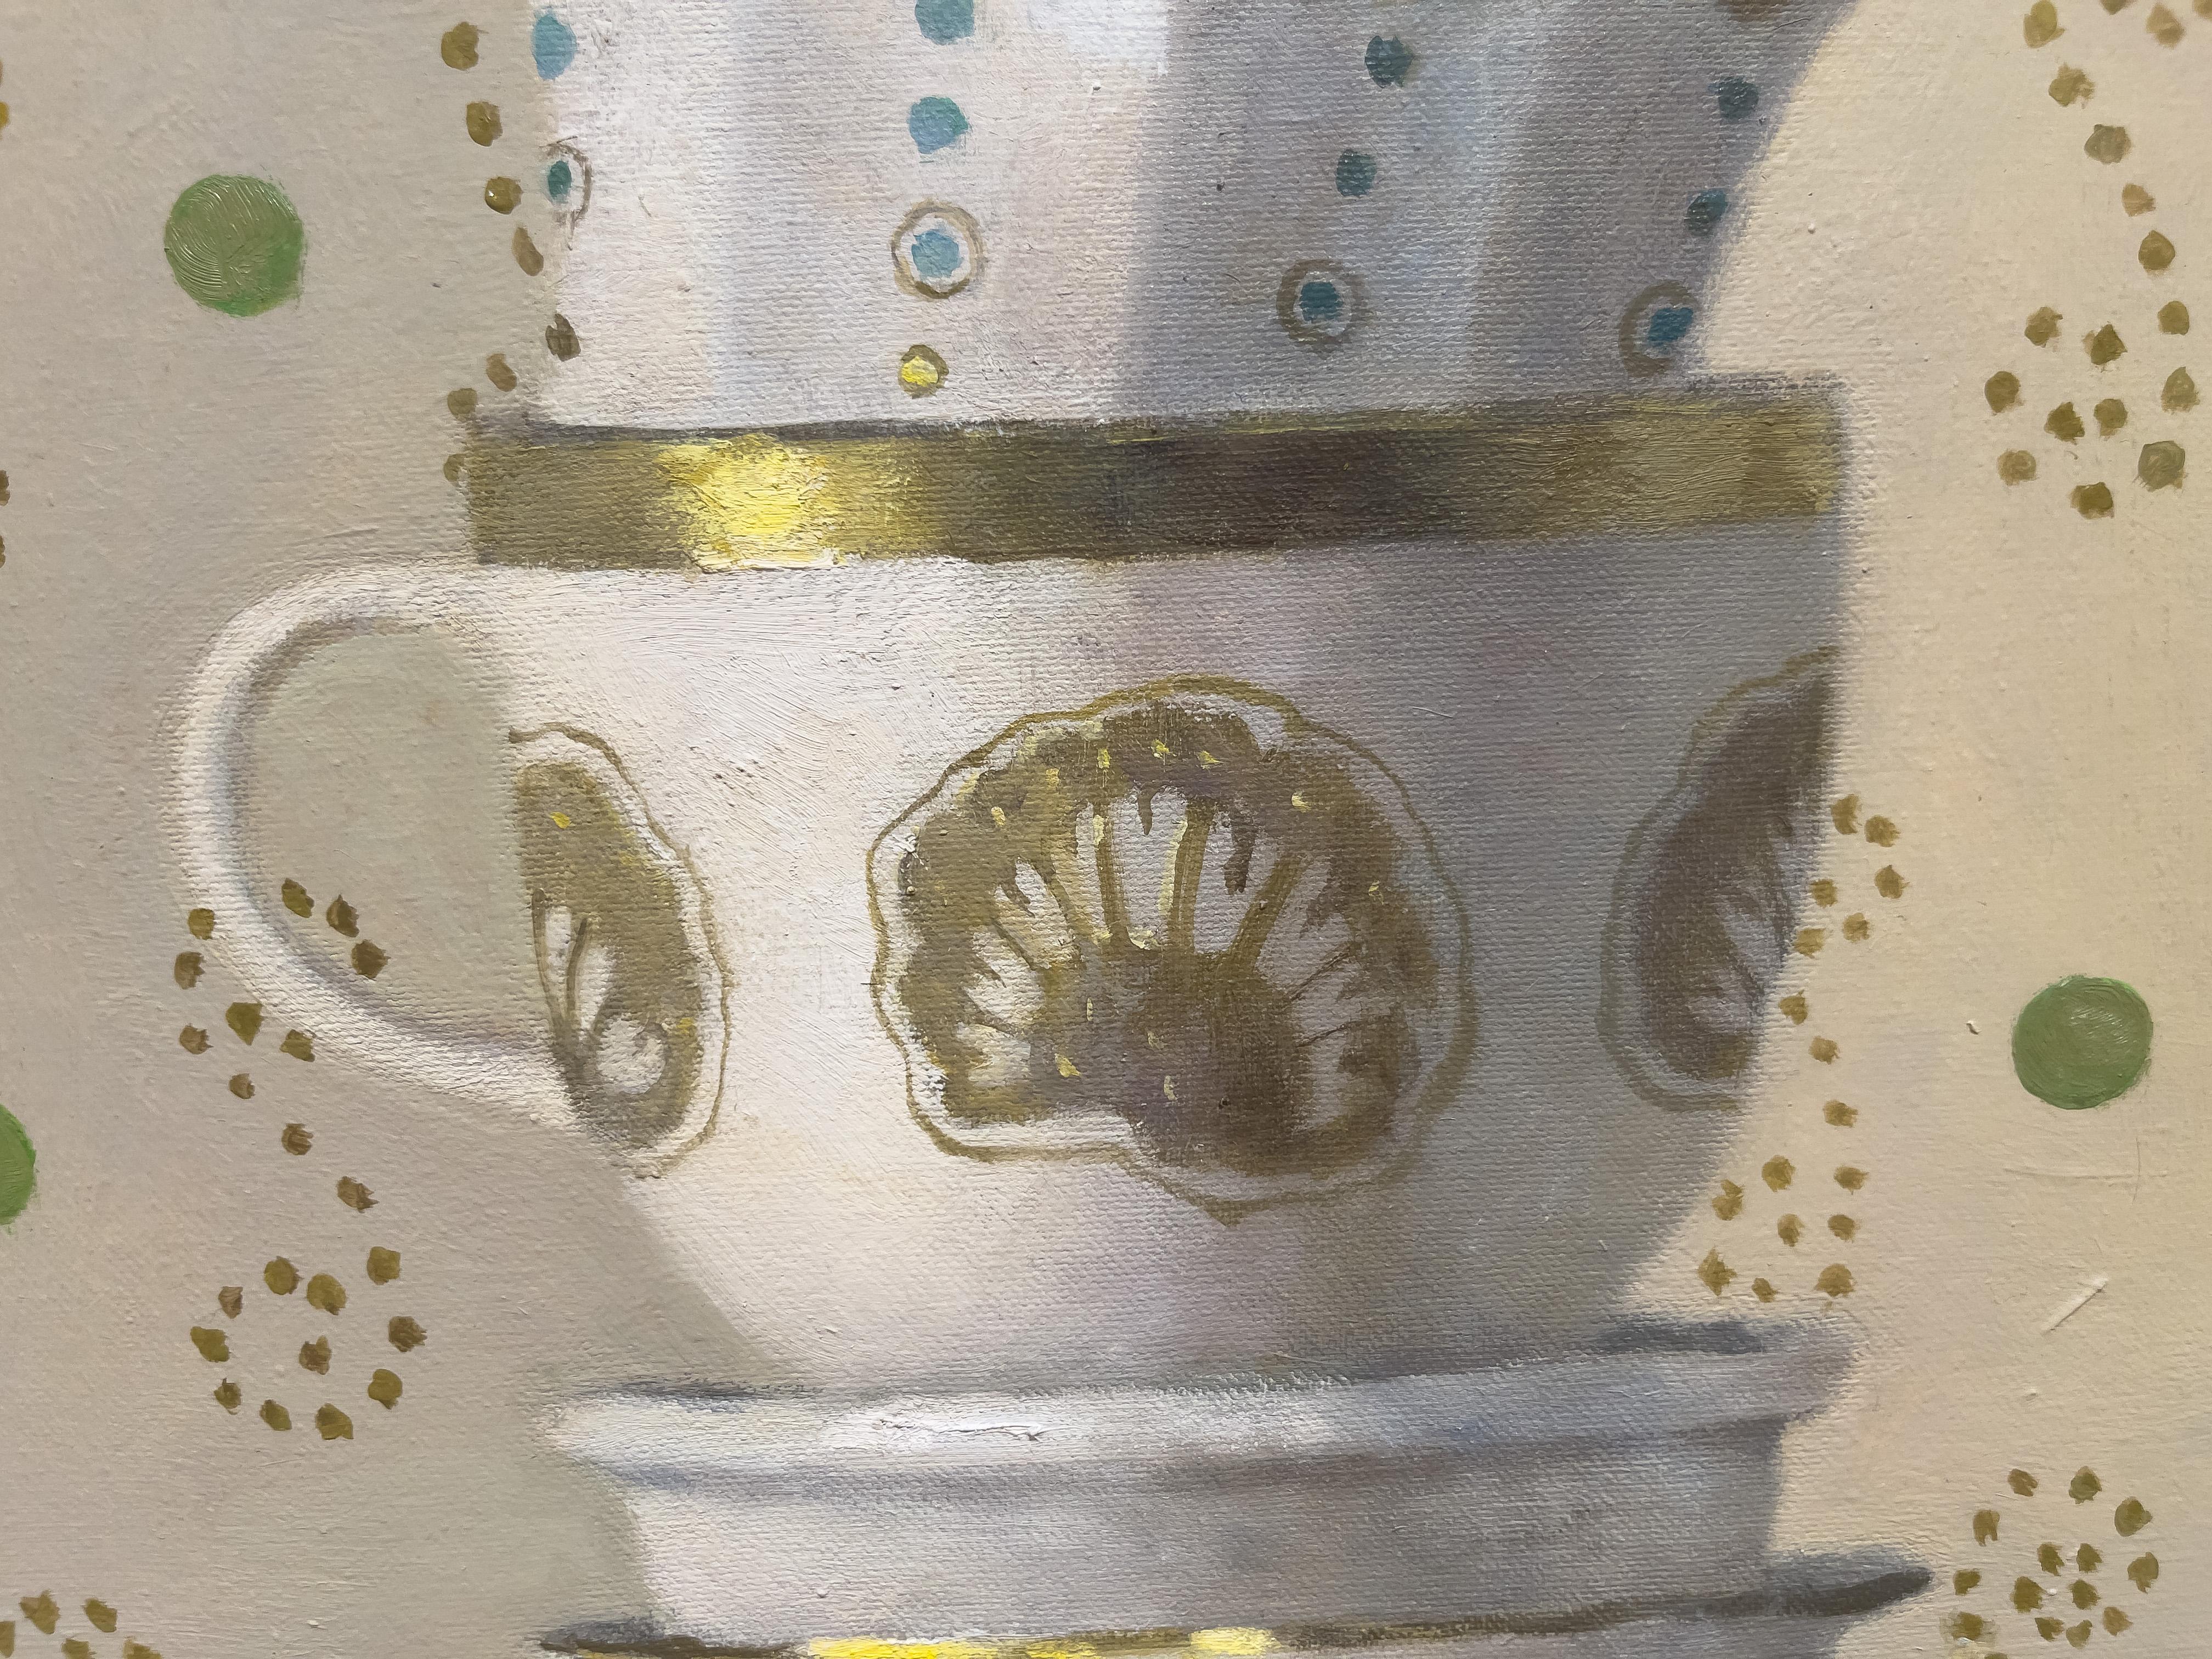 TOWER WITH GOLD SHELL CUP - Still life, teacups, realism - Contemporary Painting by Olga Antonova